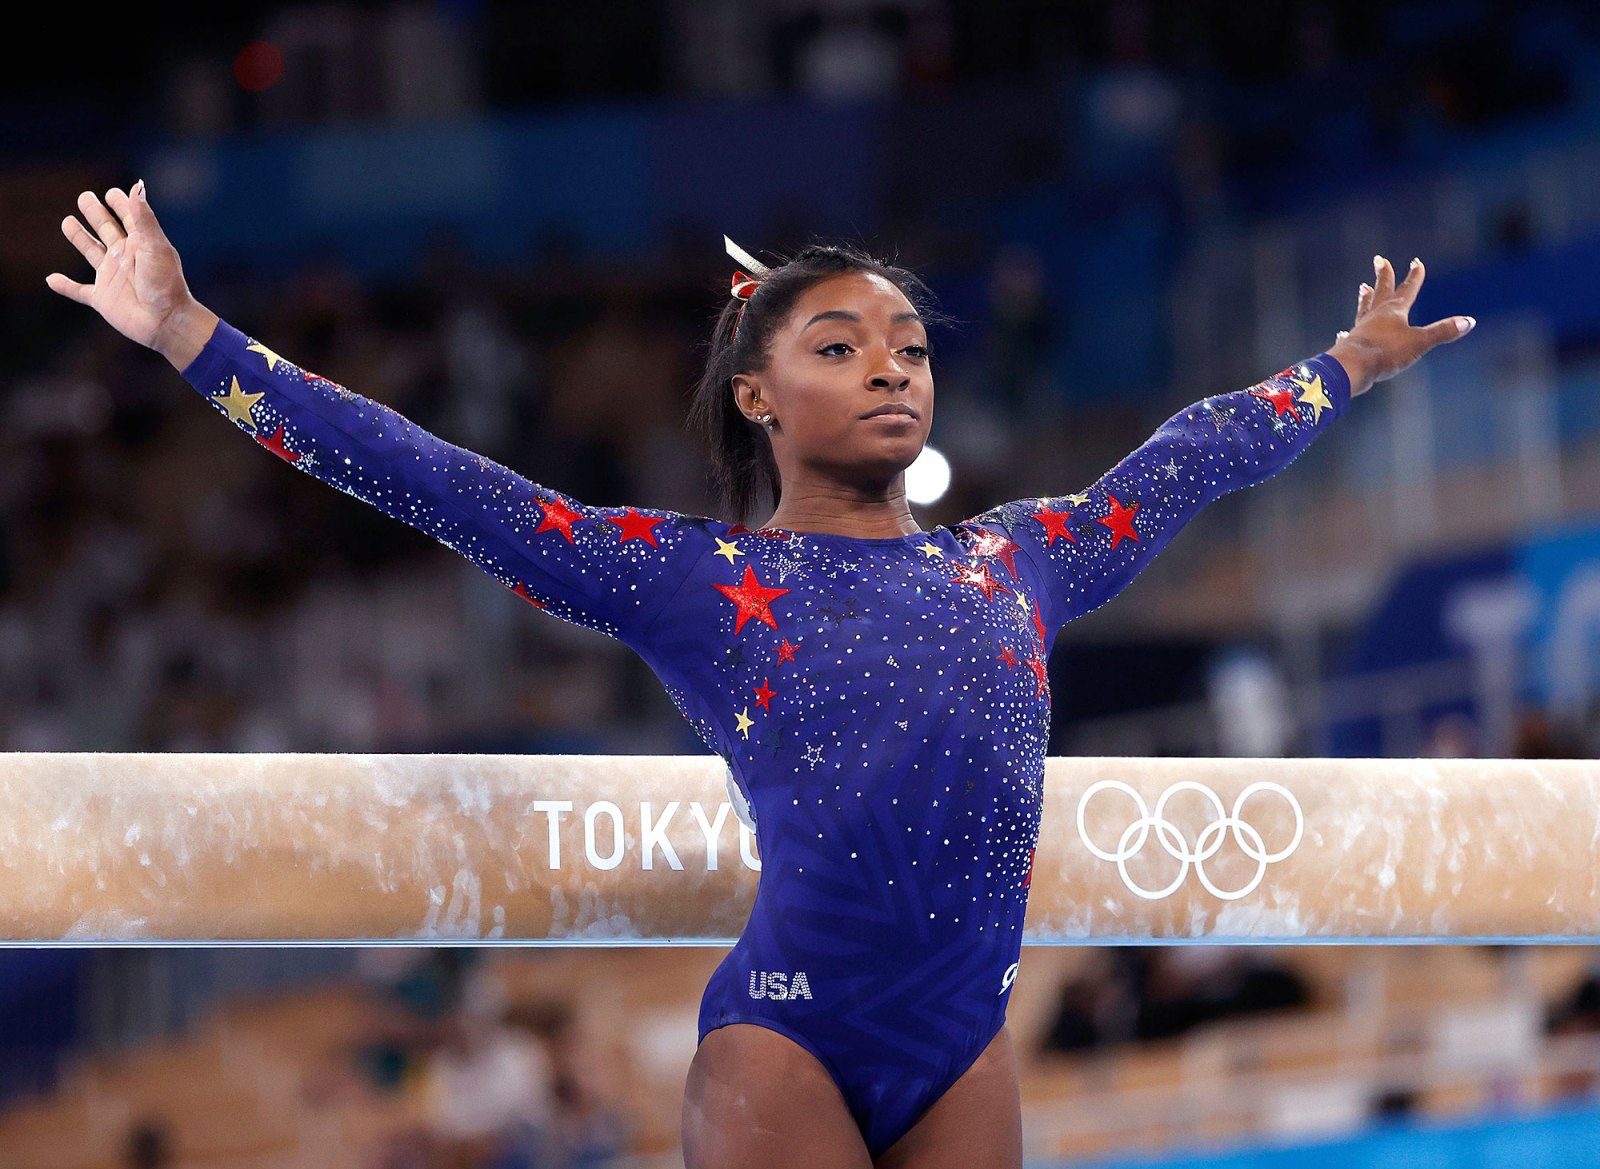 Simone Biles Will Compete in Balance Beam Final at Tokyo Olympics